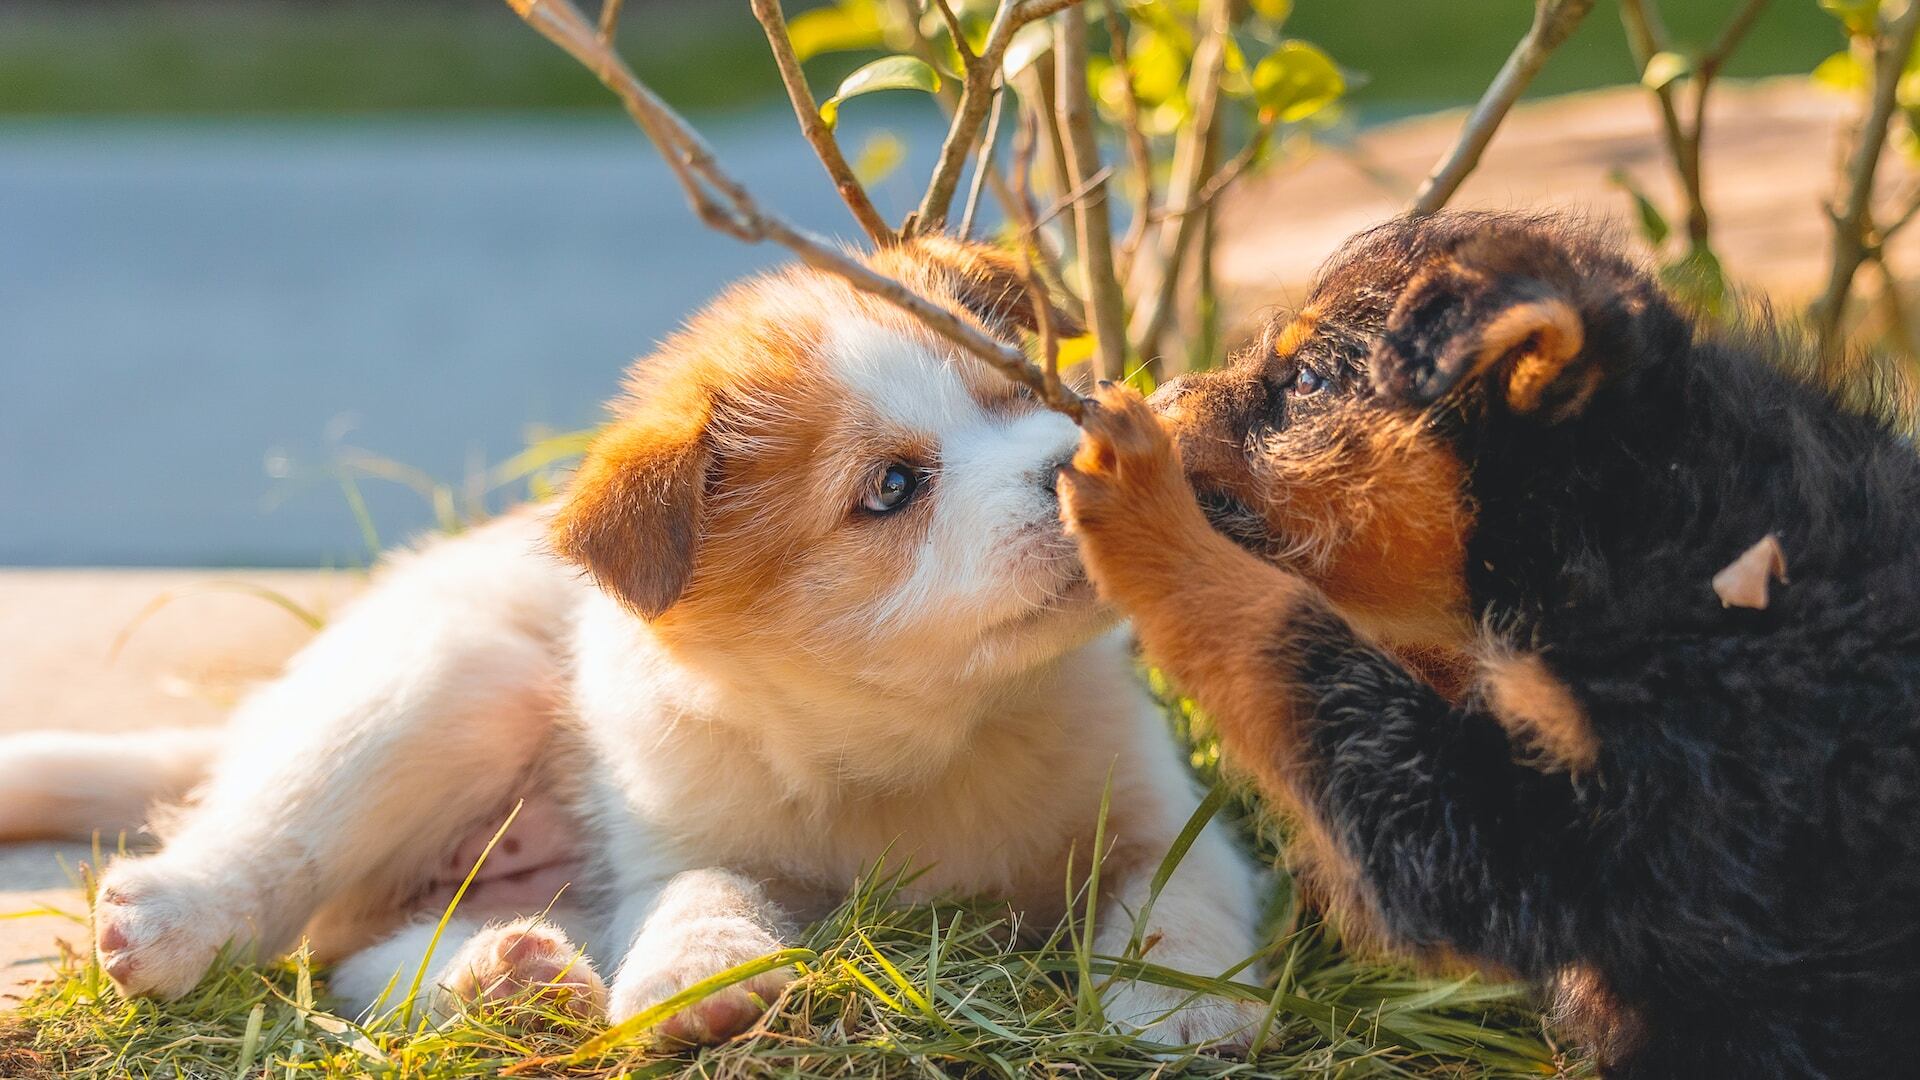 Two puppies playing with a plant together outdoors